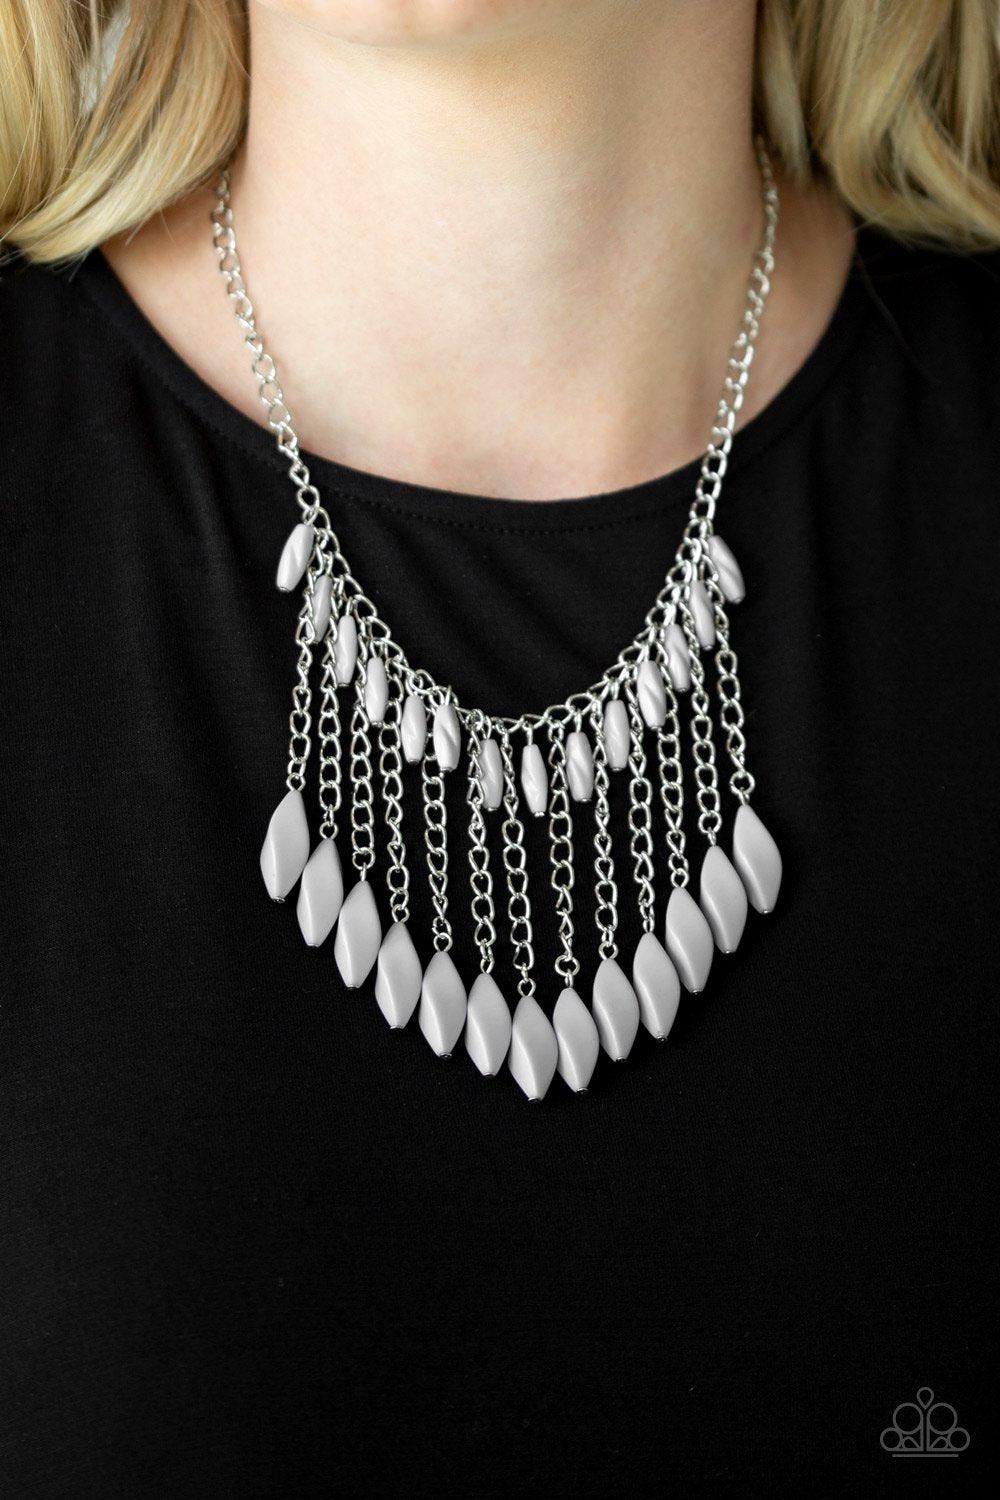 Venturous Vibes Silver Necklace - Paparazzi Accessories - lightbox -CarasShop.com - $5 Jewelry by Cara Jewels